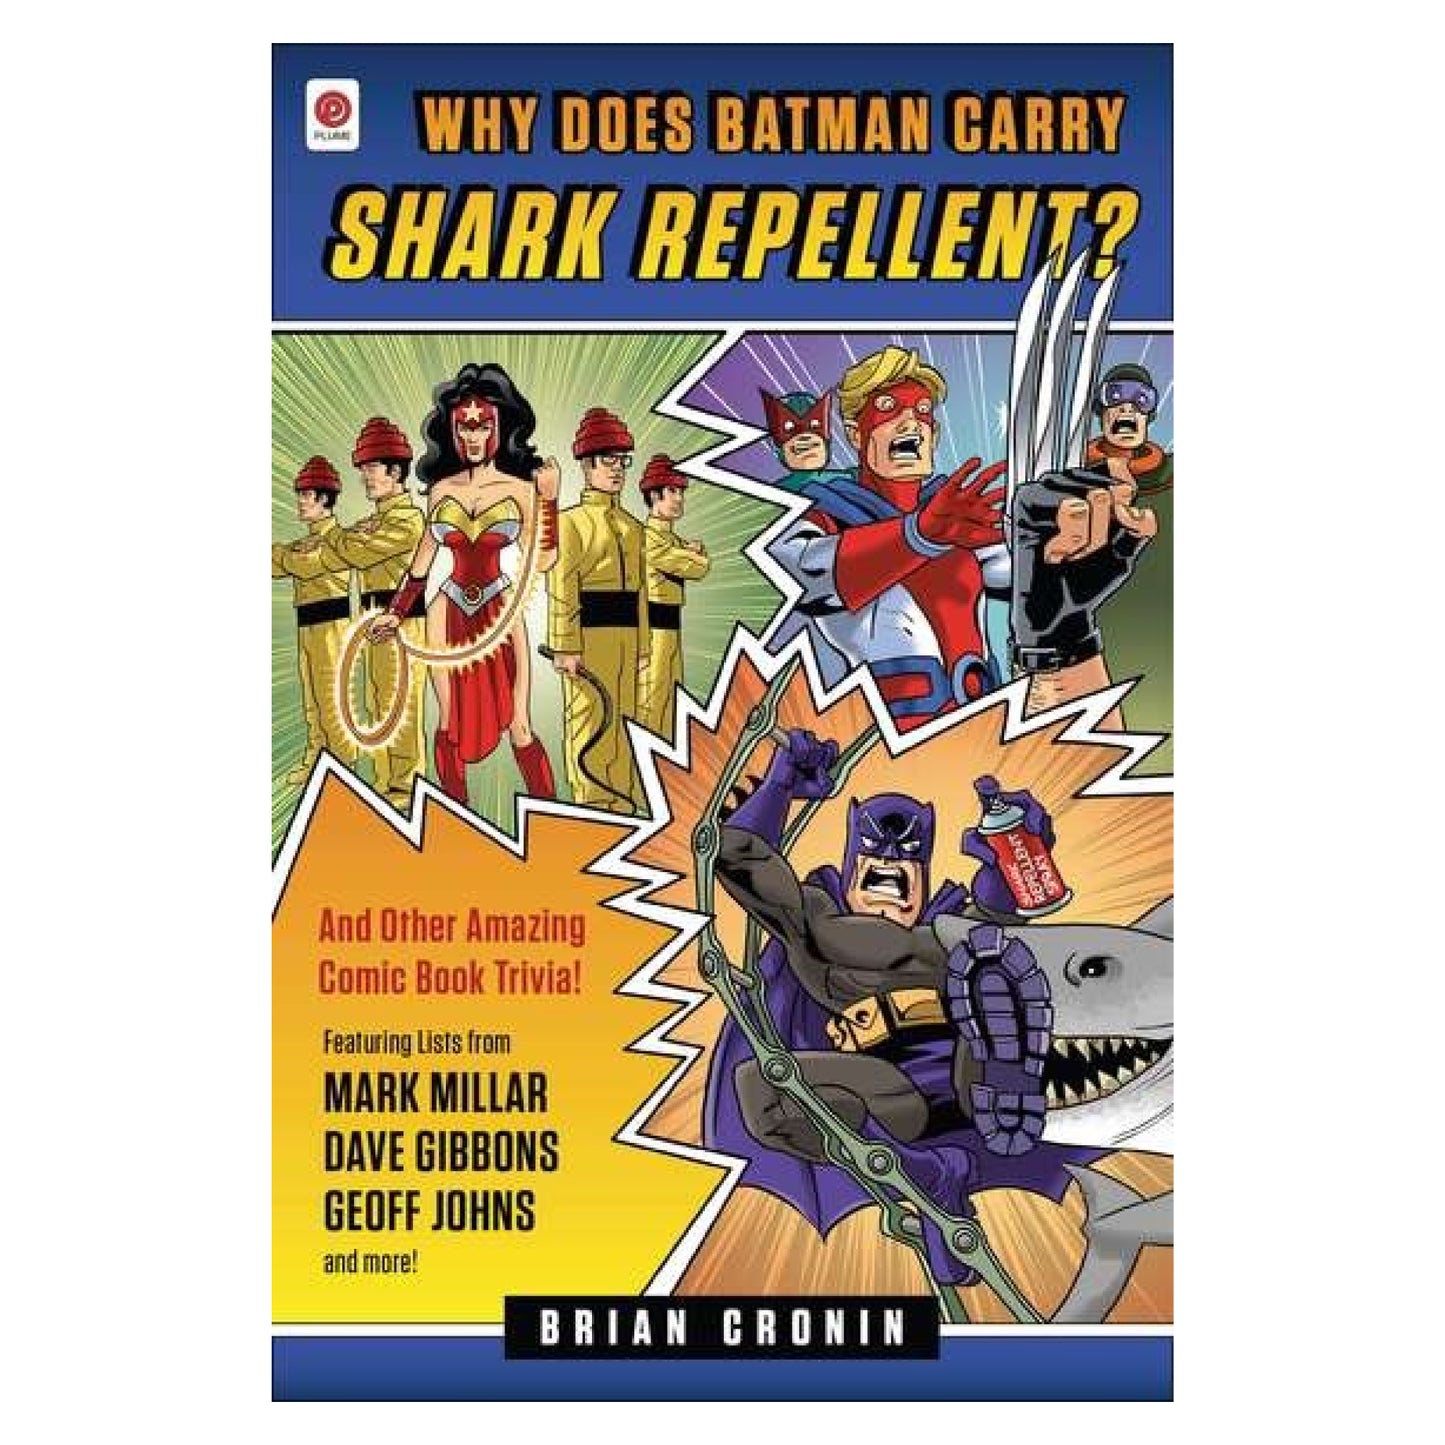 Why Does Batman Carry Shark Repellent? And Other Amazing Comic Book Trivia!